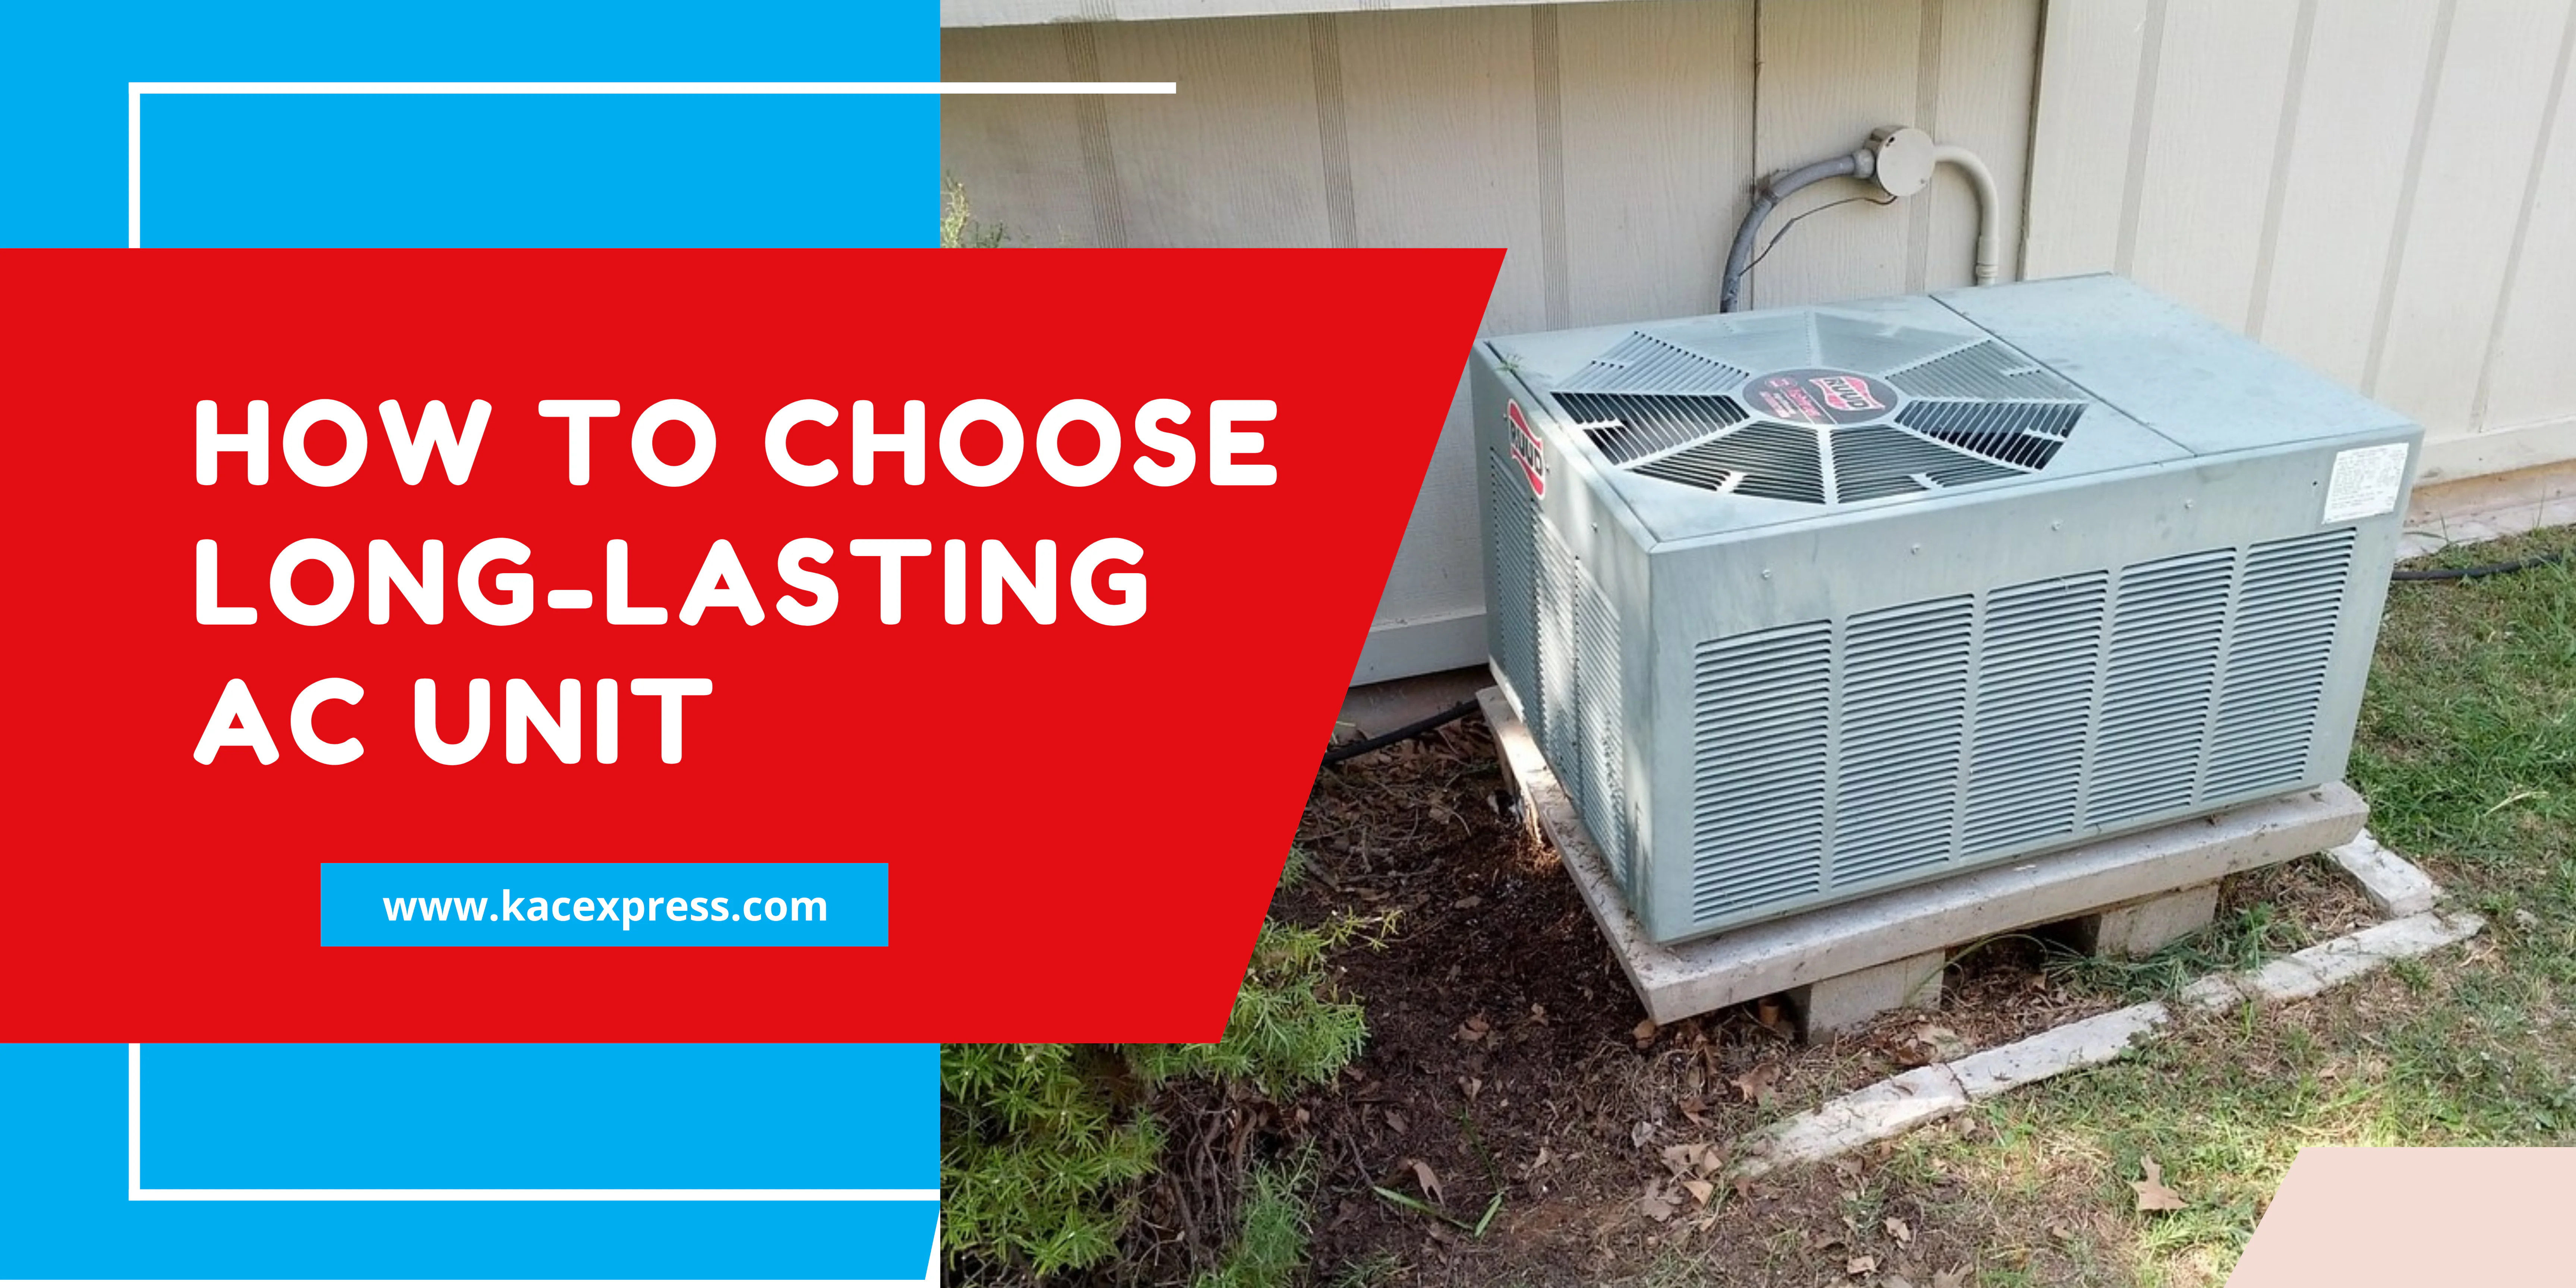 How to Choose a Long-Lasting AC Unit